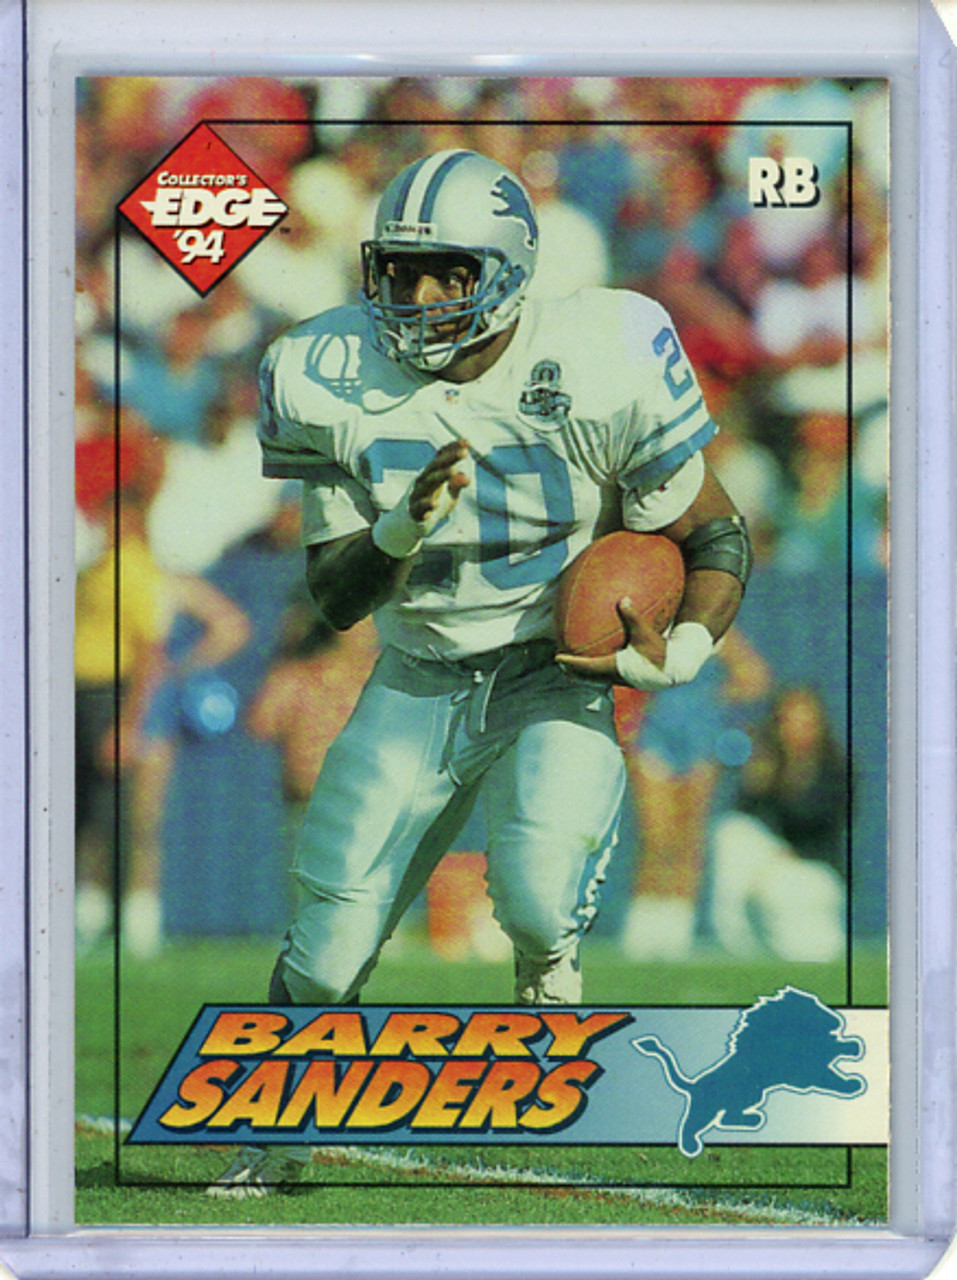 Barry Sanders 1994 Collector's Edge #63 (CQ)